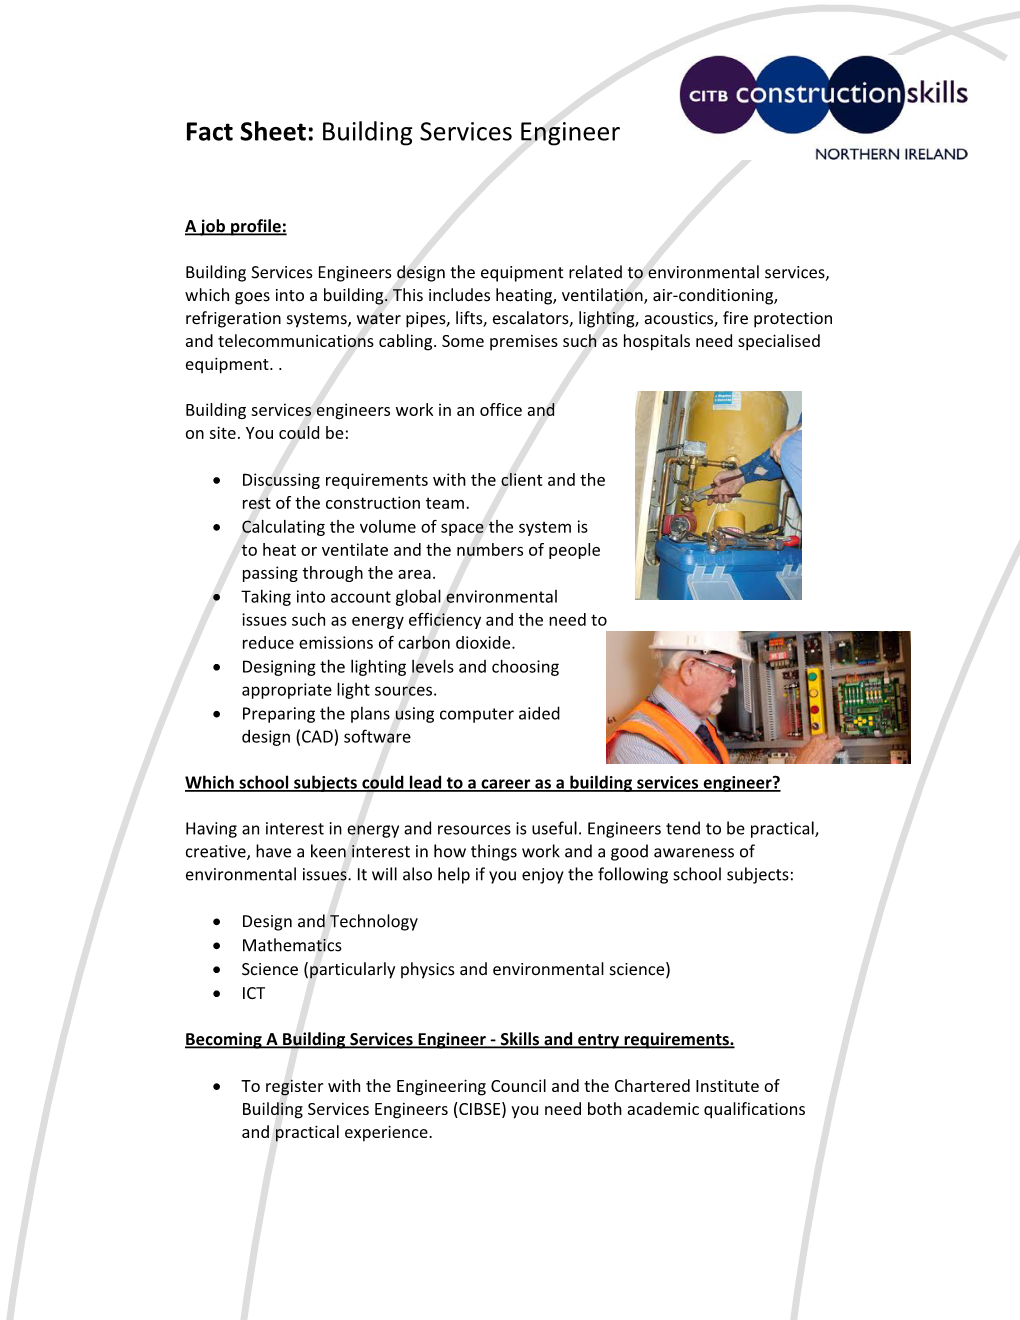 Fact Sheet: Building Services Engineer